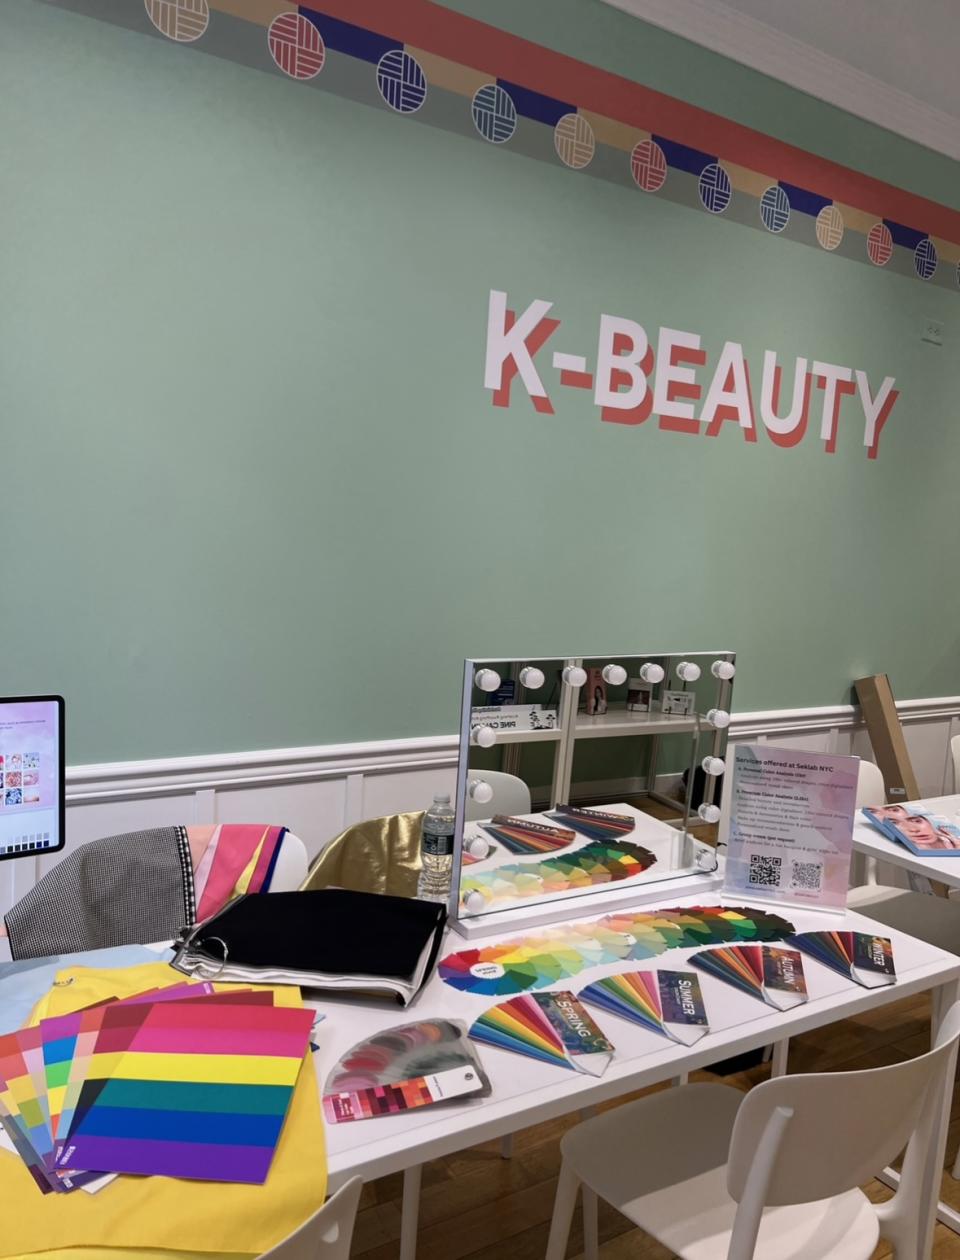 A K-beauty addition in Seklab.